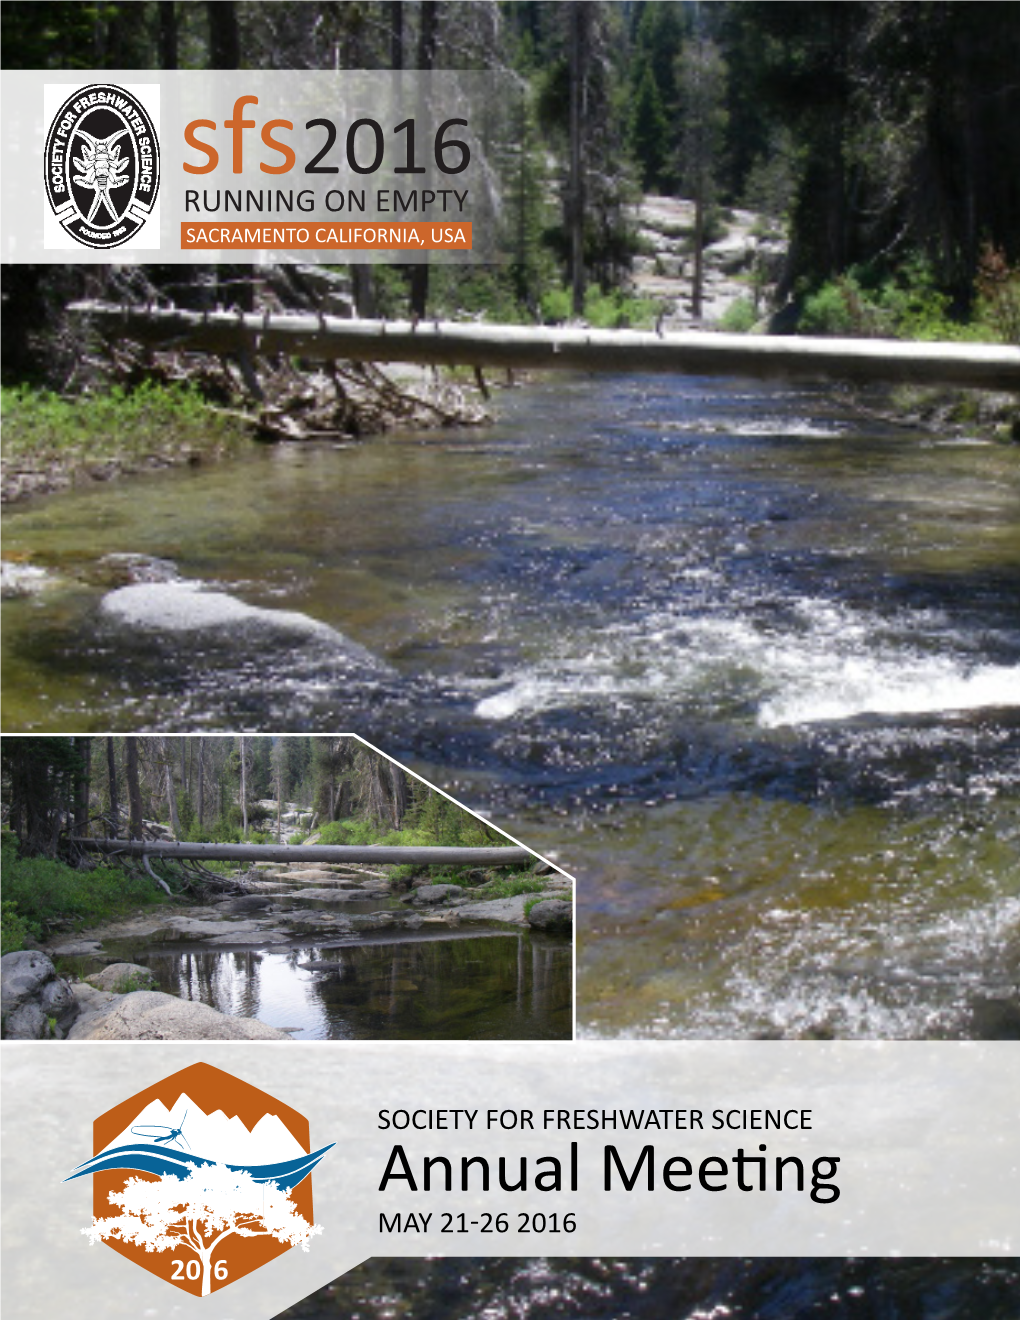 Society for Freshwater Science Annual Meeting May 21-26 2016 Sacramento Convention Center Street Level